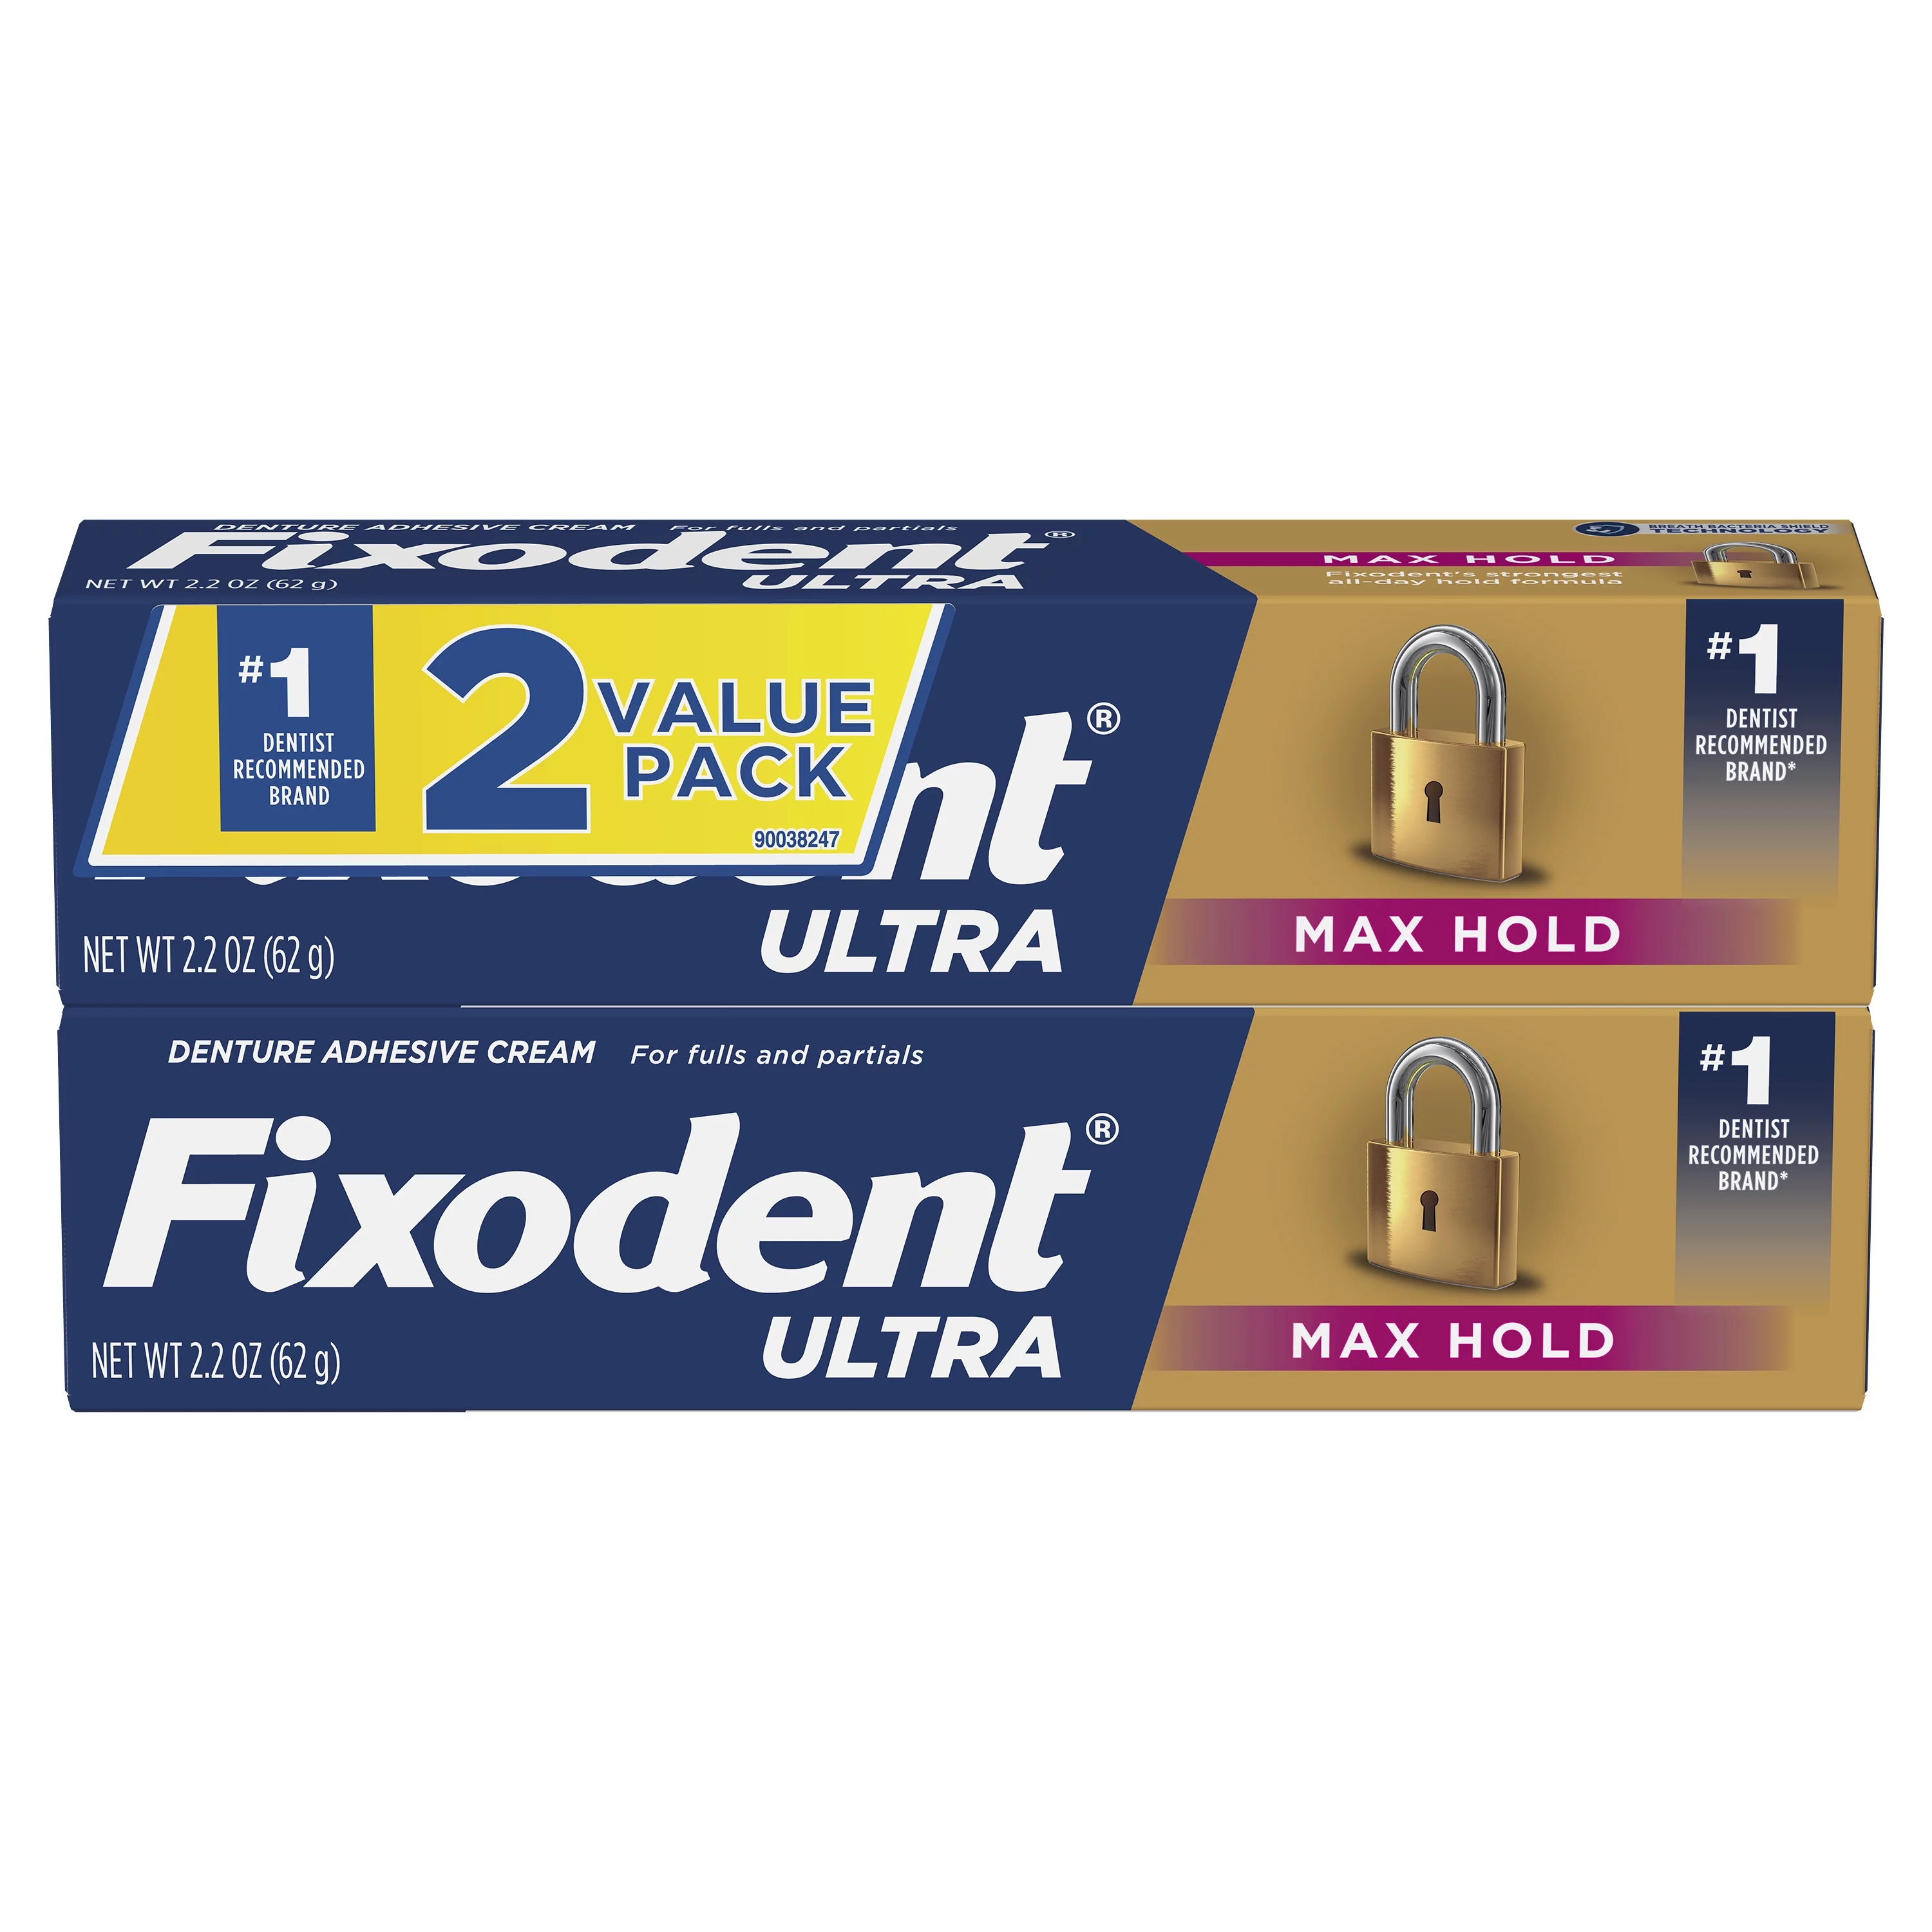 Fixodent Ultra Max Hold Denture Adhesive, 2.2 oz